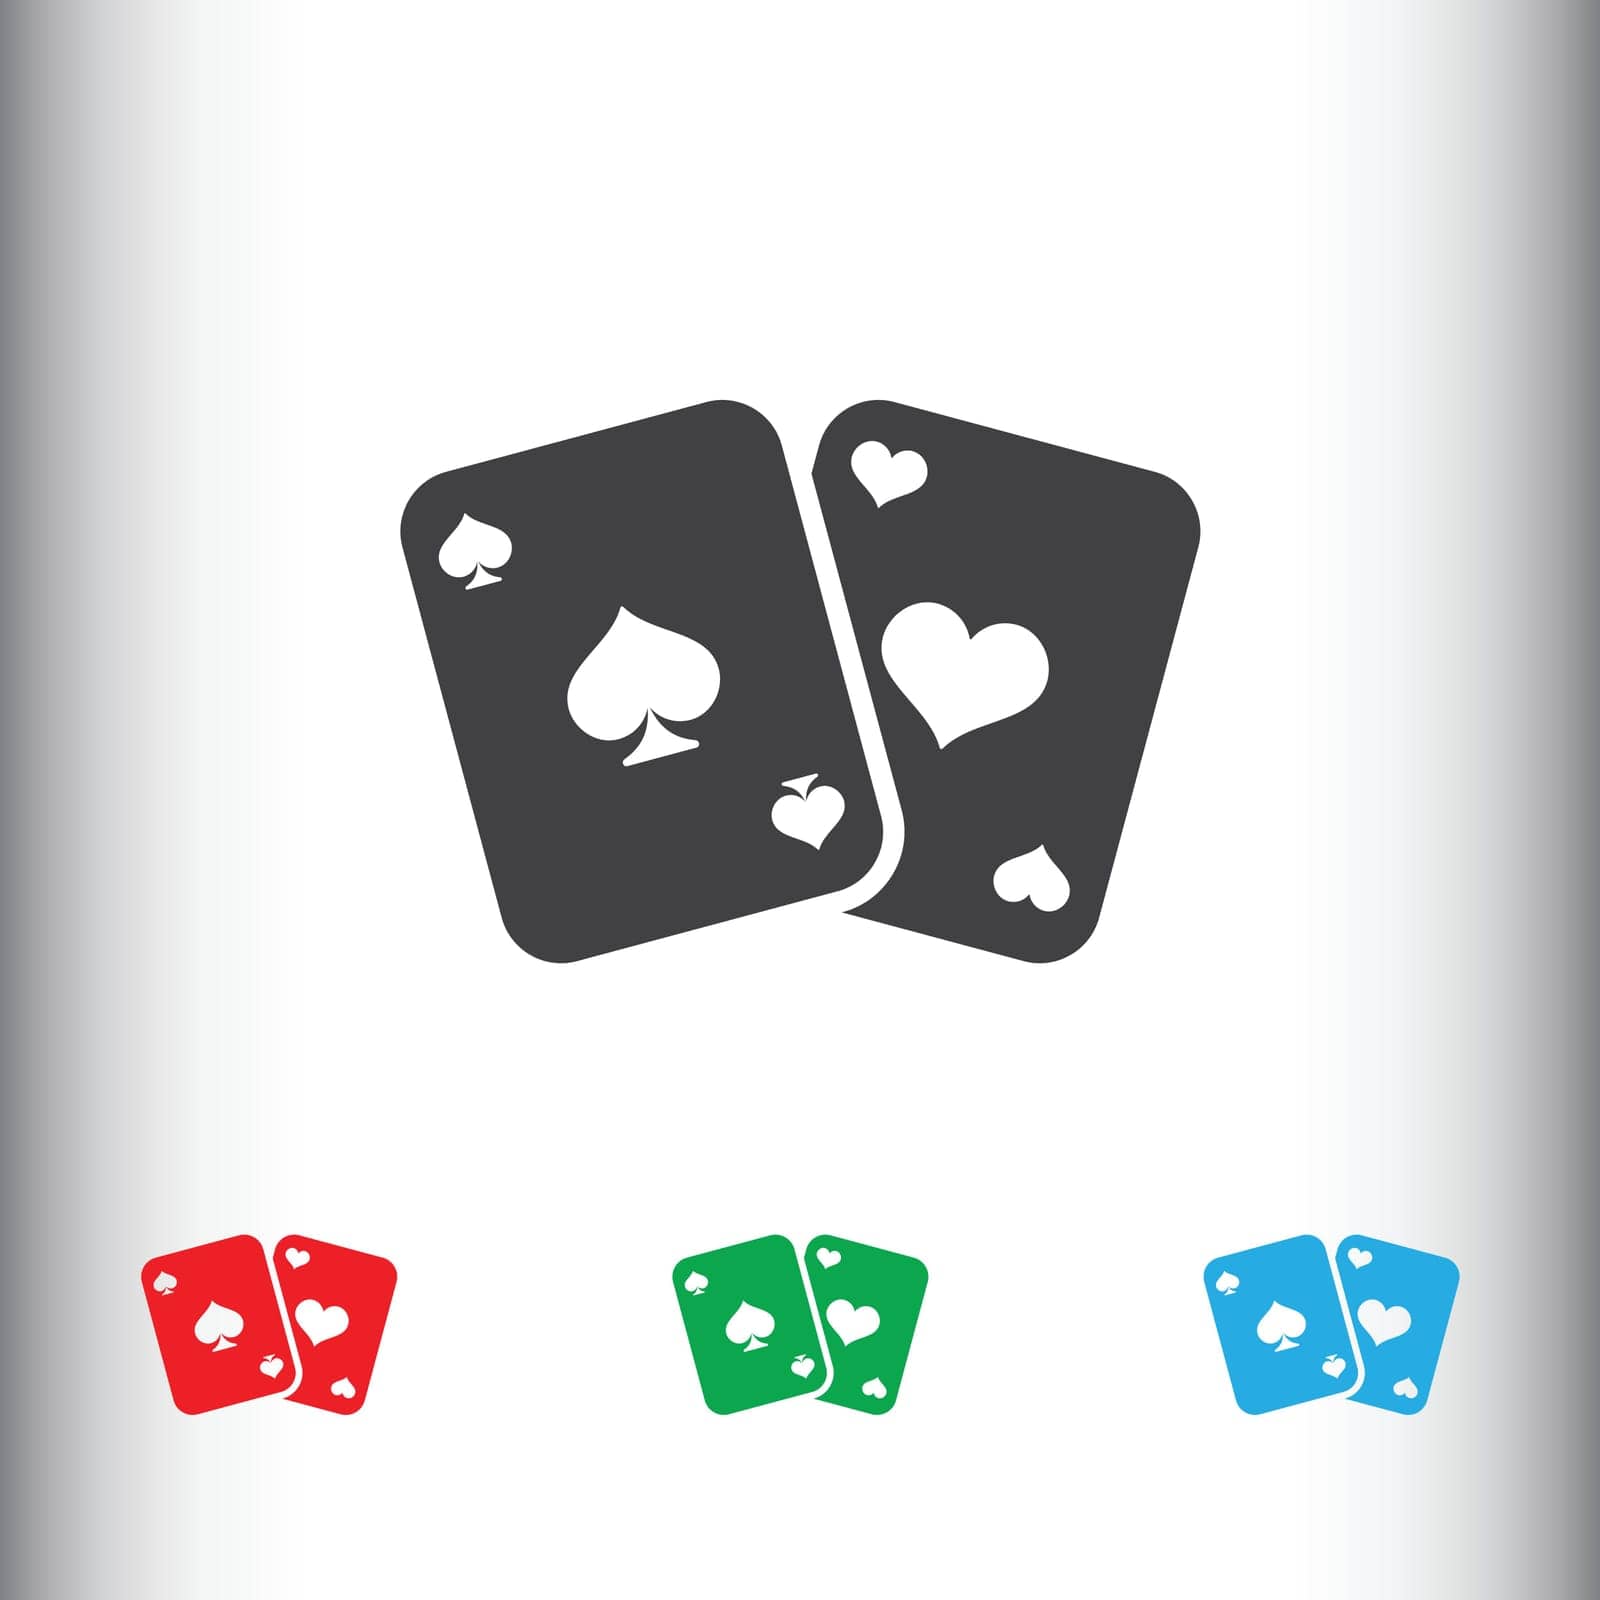 play,symbol,game,ace,cards,color,objects,icon,sign,isolated,gambling,casino,simple,suits,symbols,space,red,white,design,club,vector,win,decoration,leisure,group,element,set,shape,suites,gamble,poker,black,icons,jack,heart,diamond,background,playing,illustration,spades,card by ogqcorp